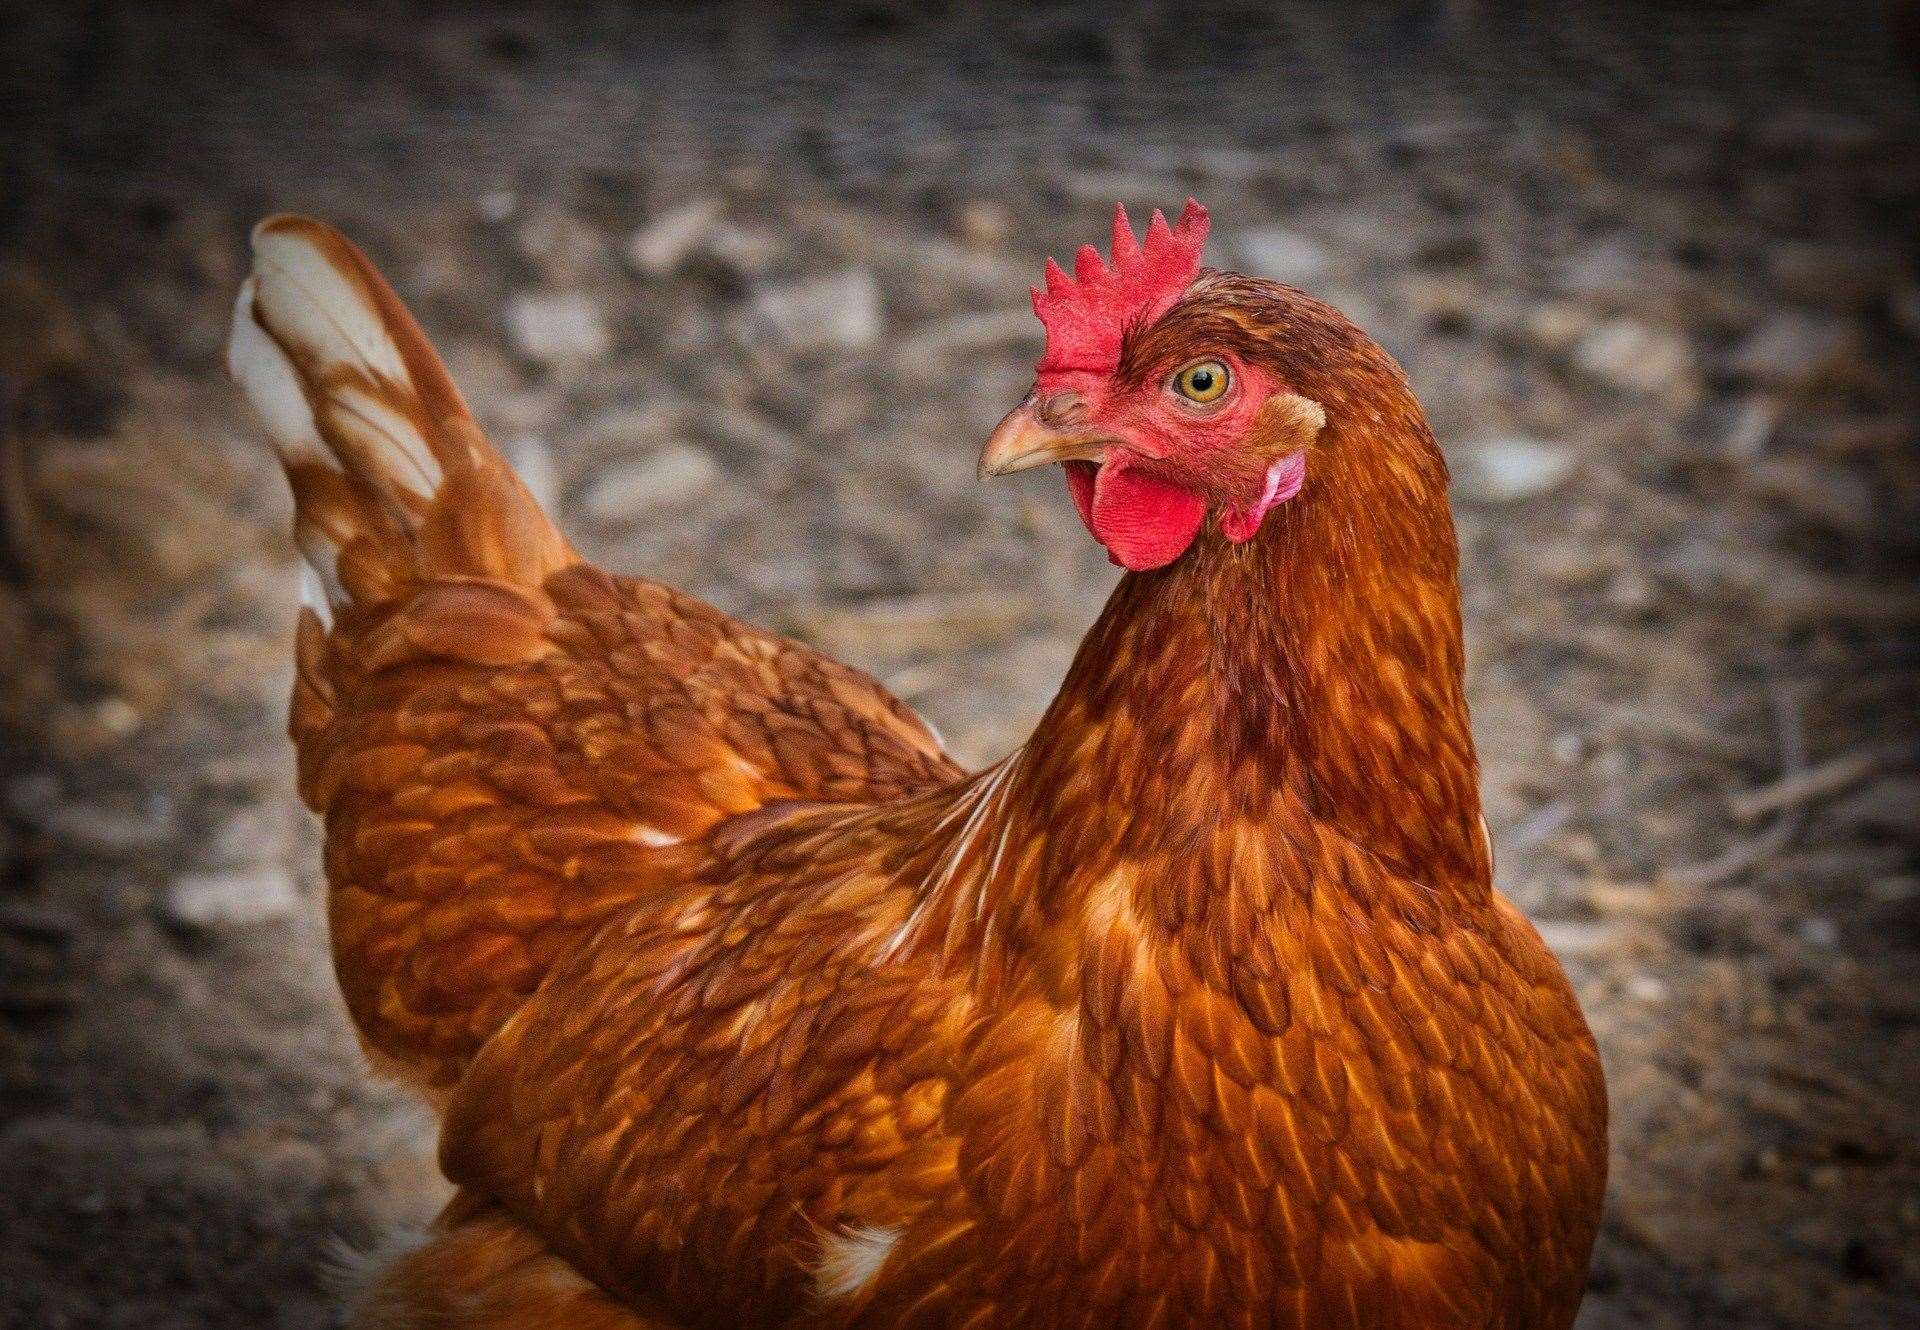 Chickens and other captive poultry and birds must be brought indoors from Monday, November 29